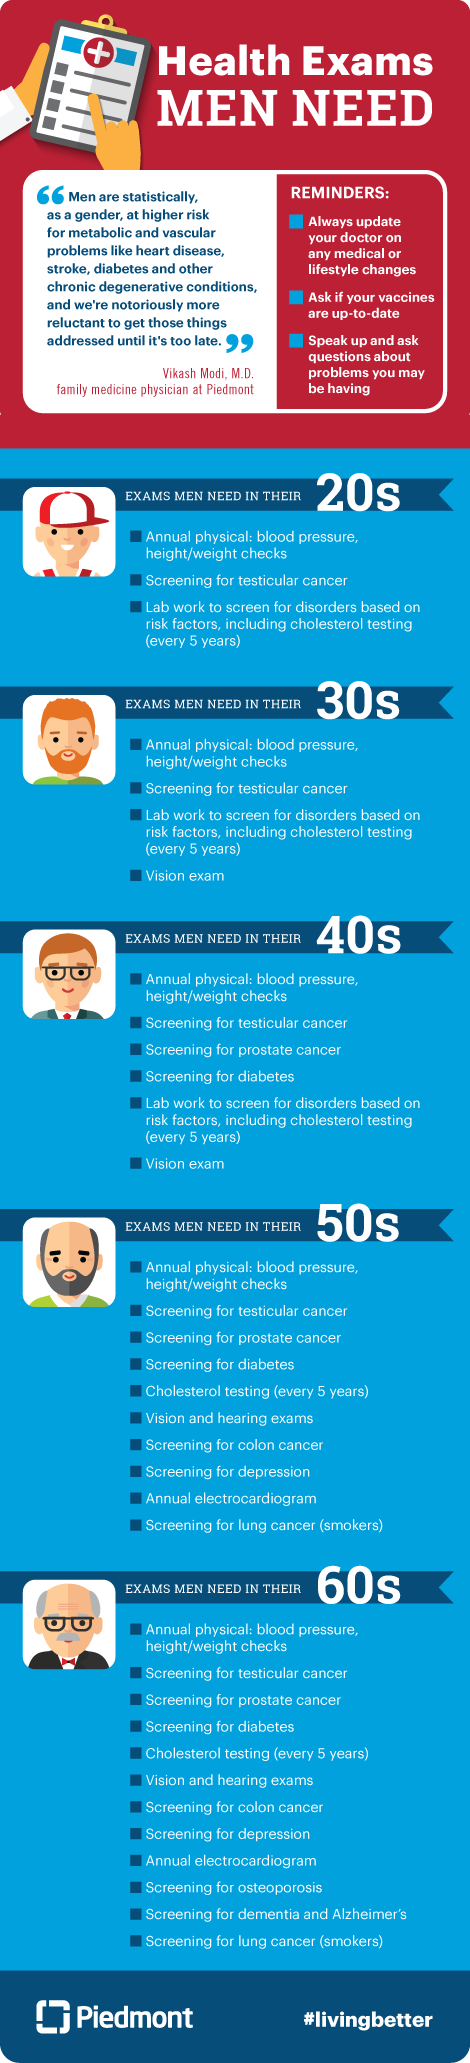 Graphic on health exams that men need. 